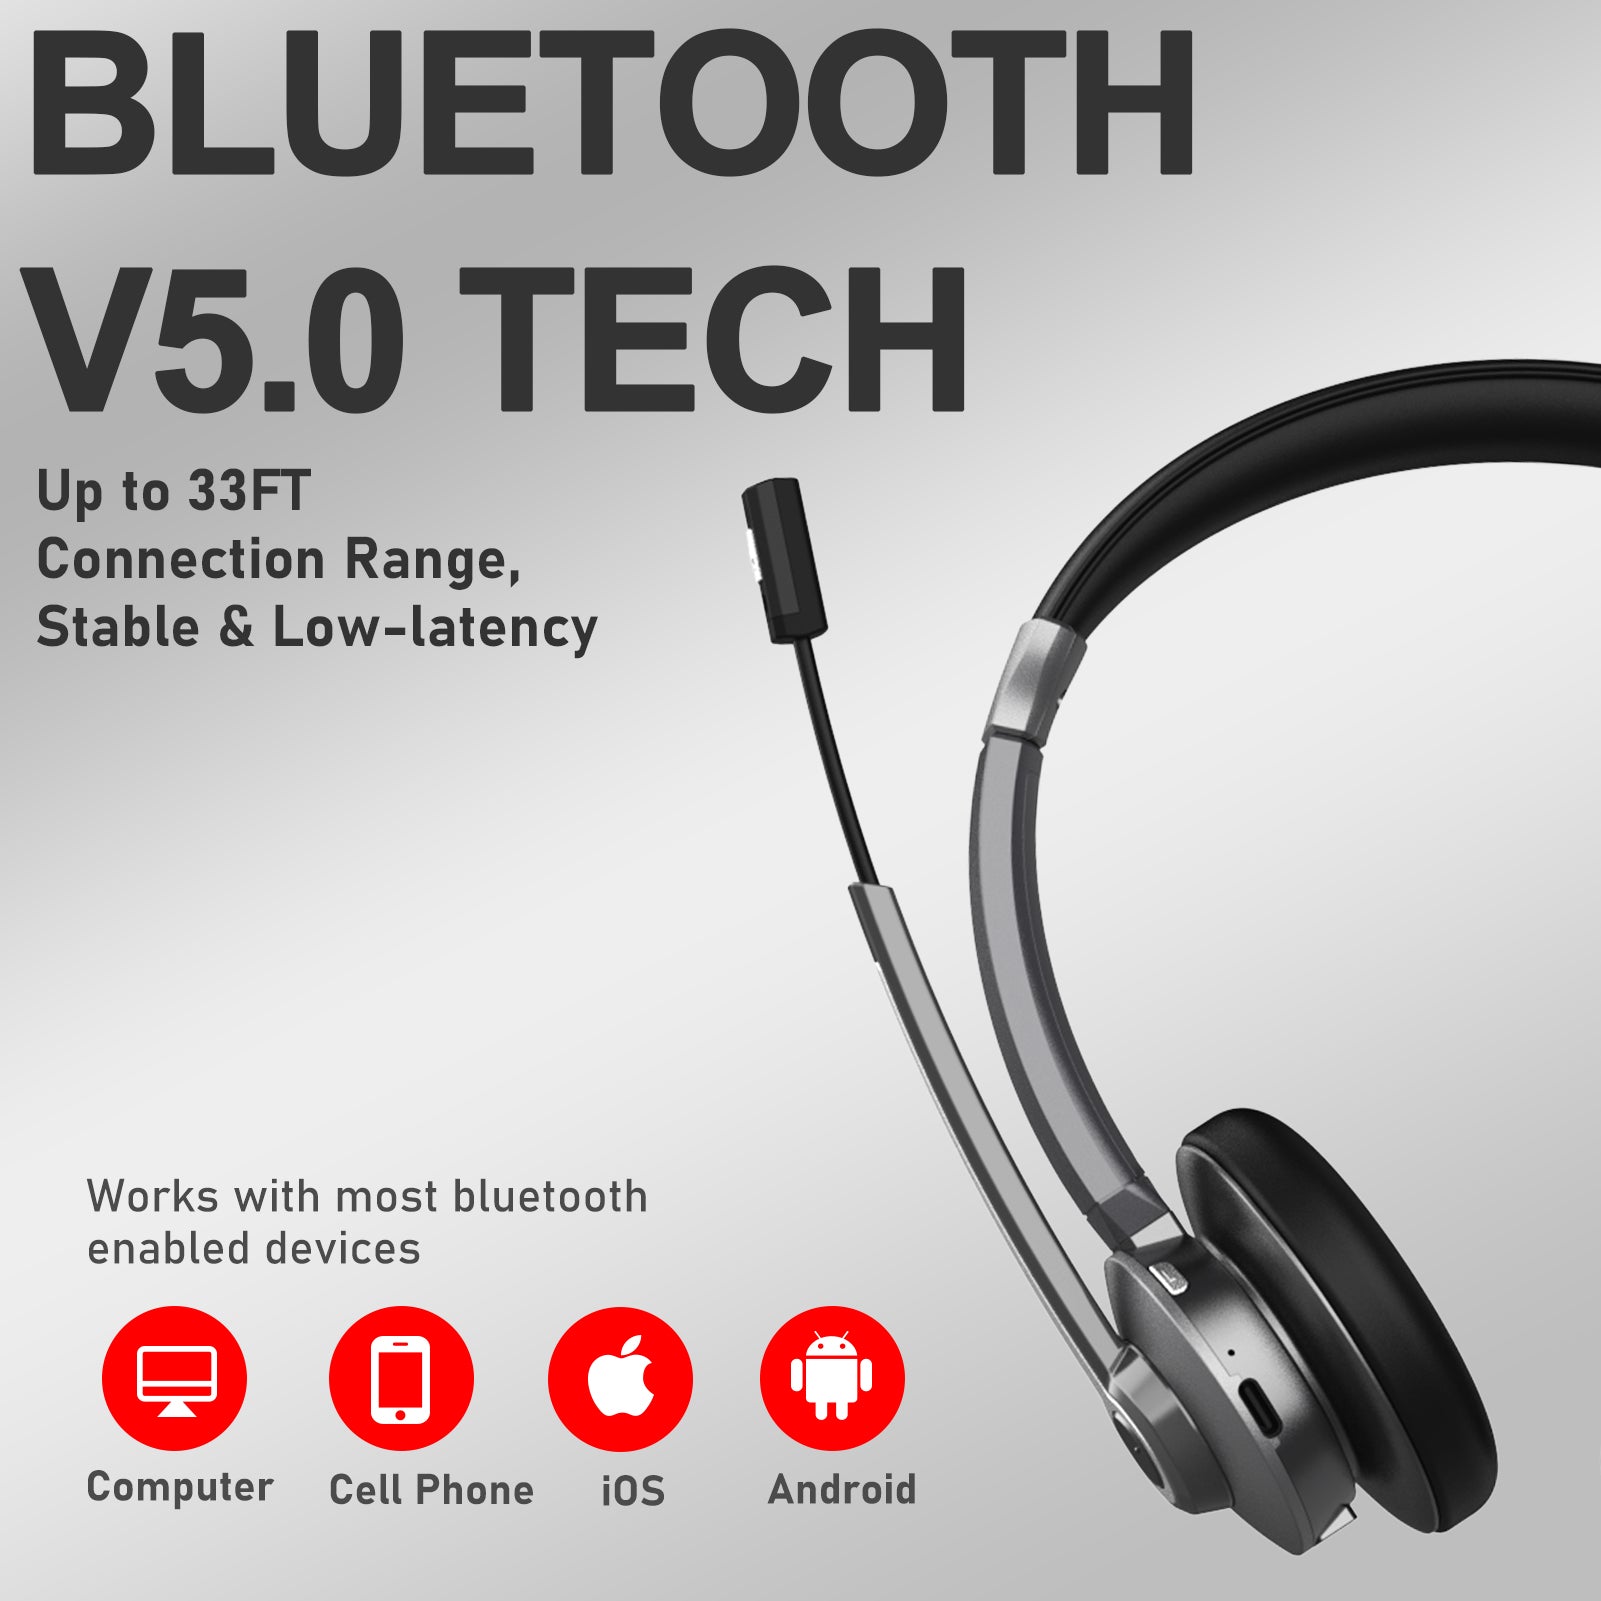 Bluetooth V5.0 tech,Up to 33ft,Connection range,Stable & Low-latency,Works with most bluetooth enabled devices,Computer,Cell phone,IOS,Android.